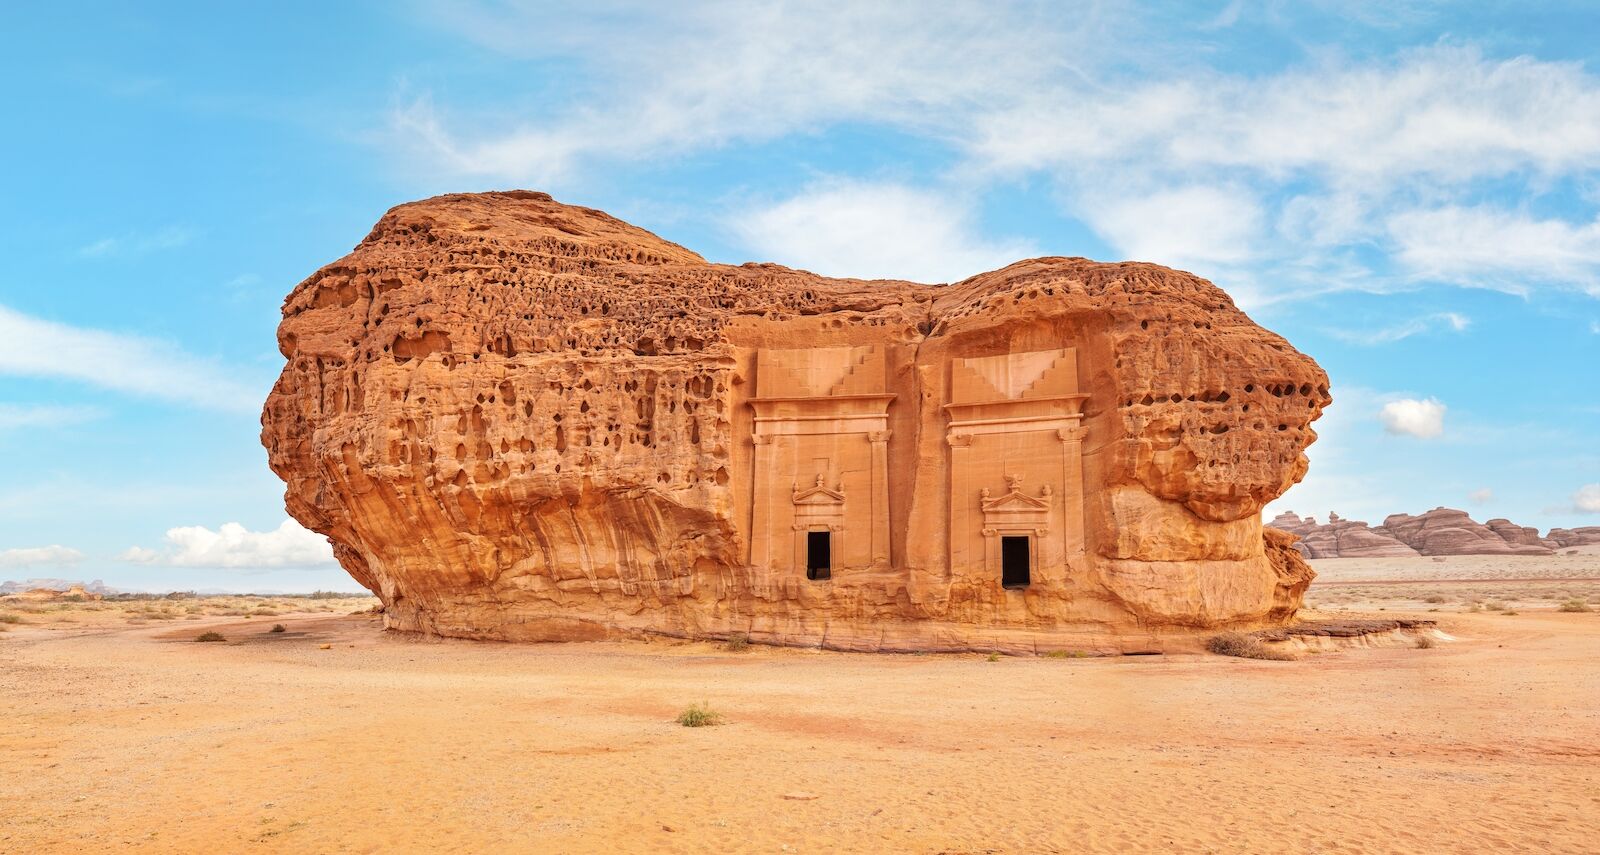 The Hegra archeological site, also known as Mada’in Saleh, in Saudi Arabia